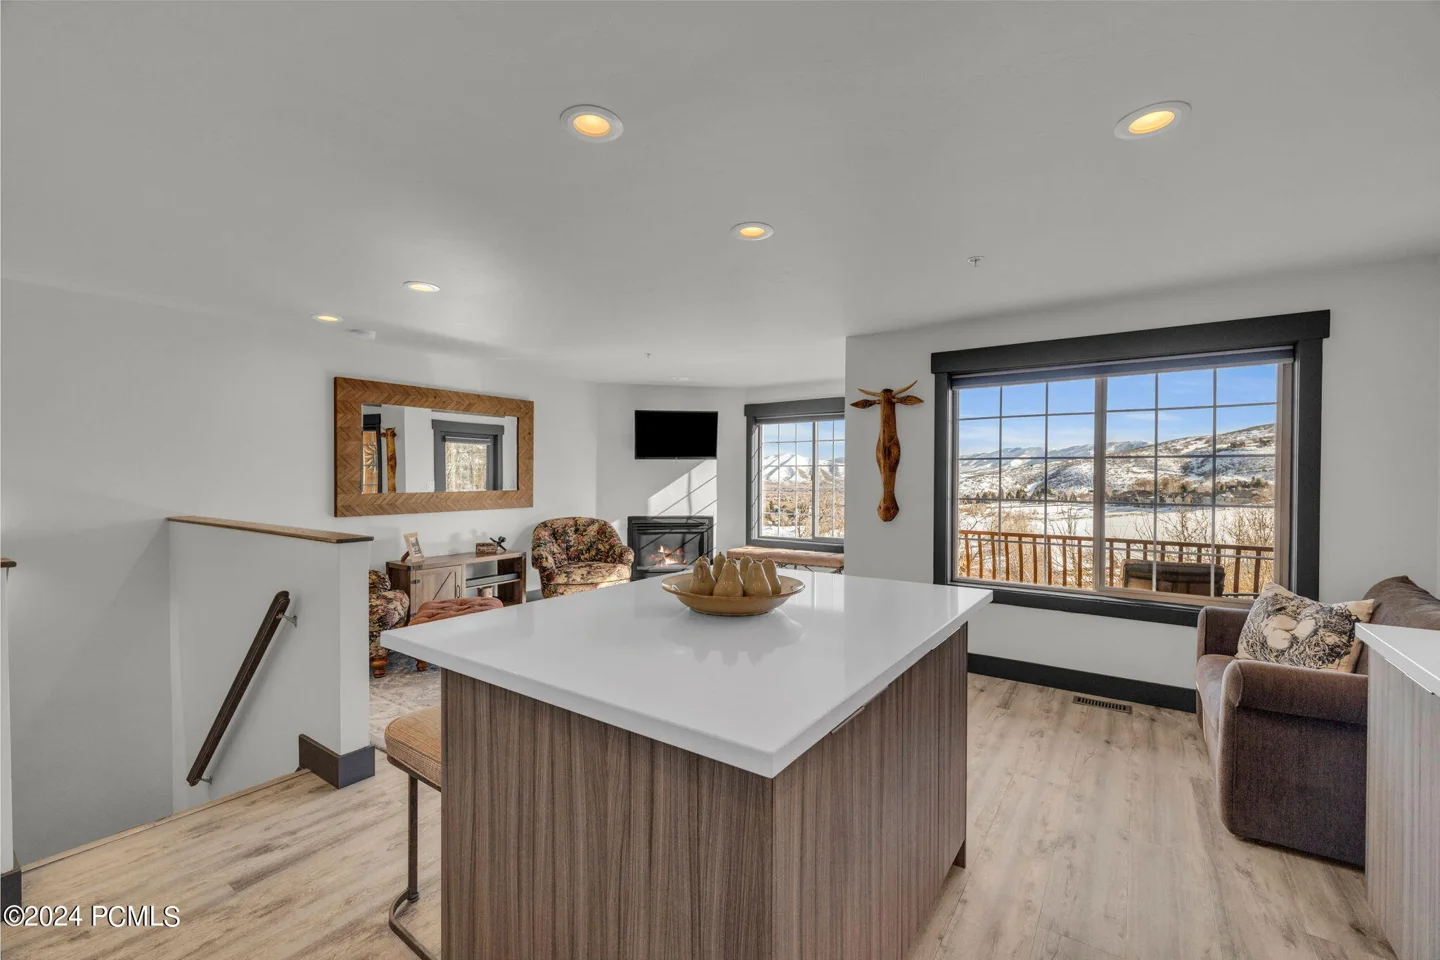 Surrounded by the Wasatch Mountains this Stunning Townhome